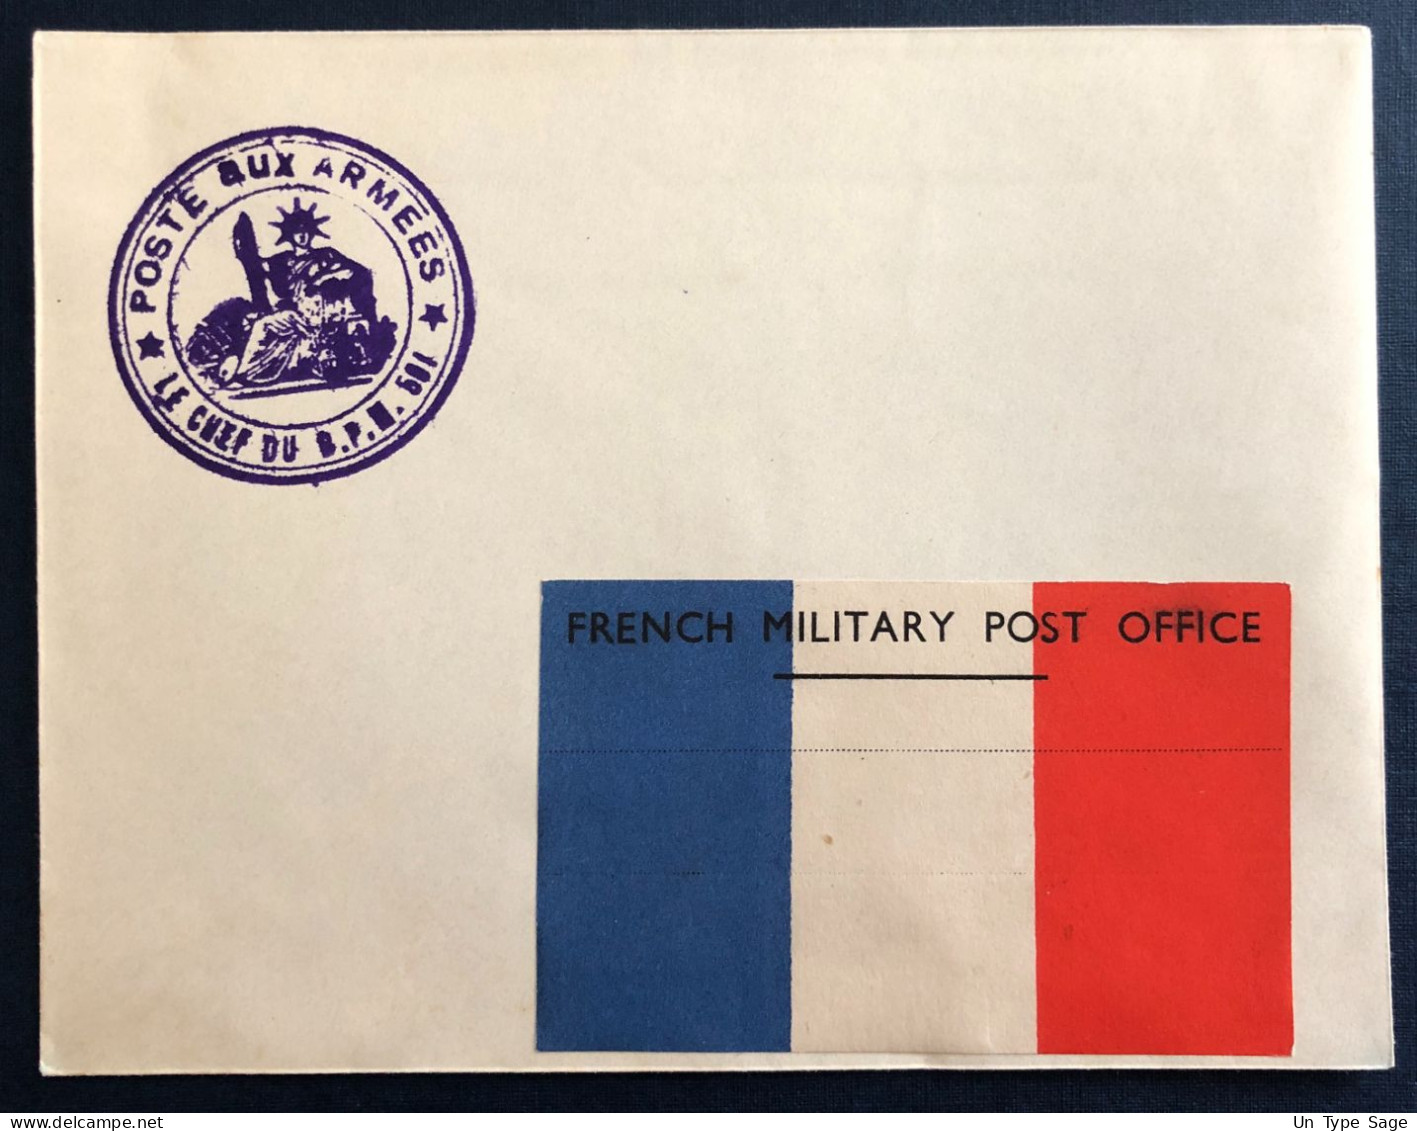 France Enveloppe Vierge FRENCH MILITARY POST OFFICE - (B3773) - 2. Weltkrieg 1939-1945